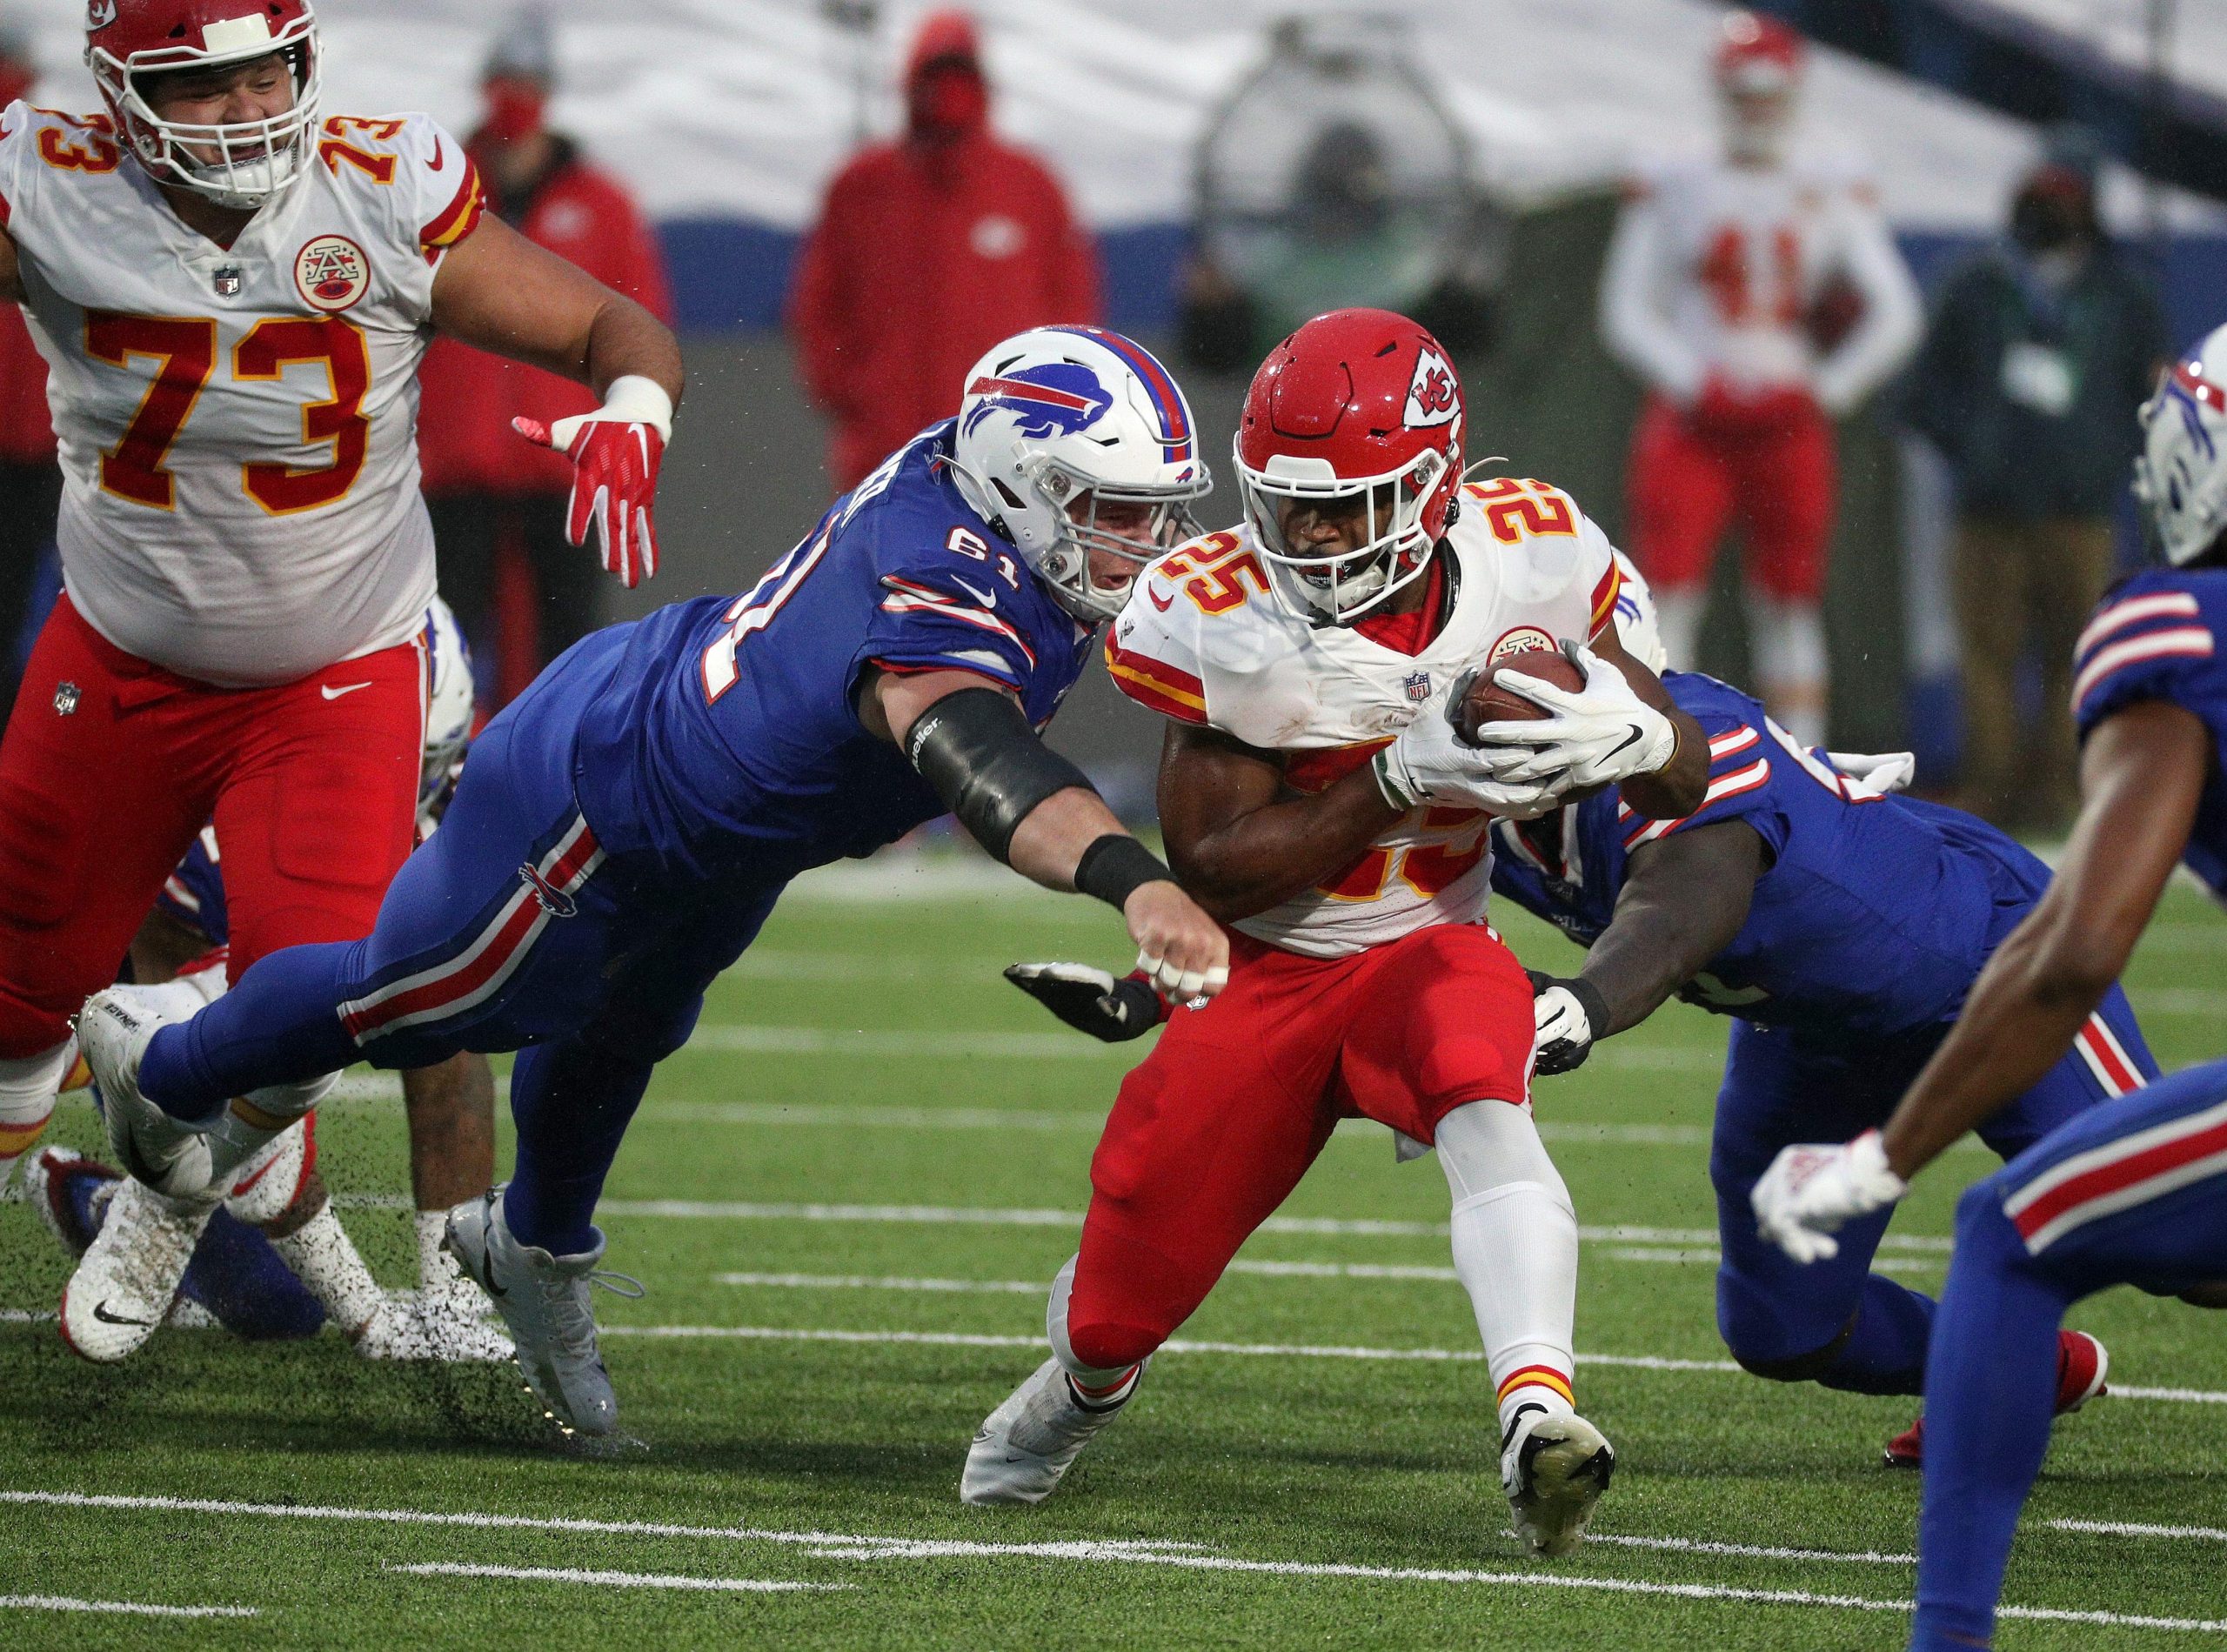 Chiefs running back Clyde Edwards-Helaire finds a seam at the line of scrimmage against the Bills.